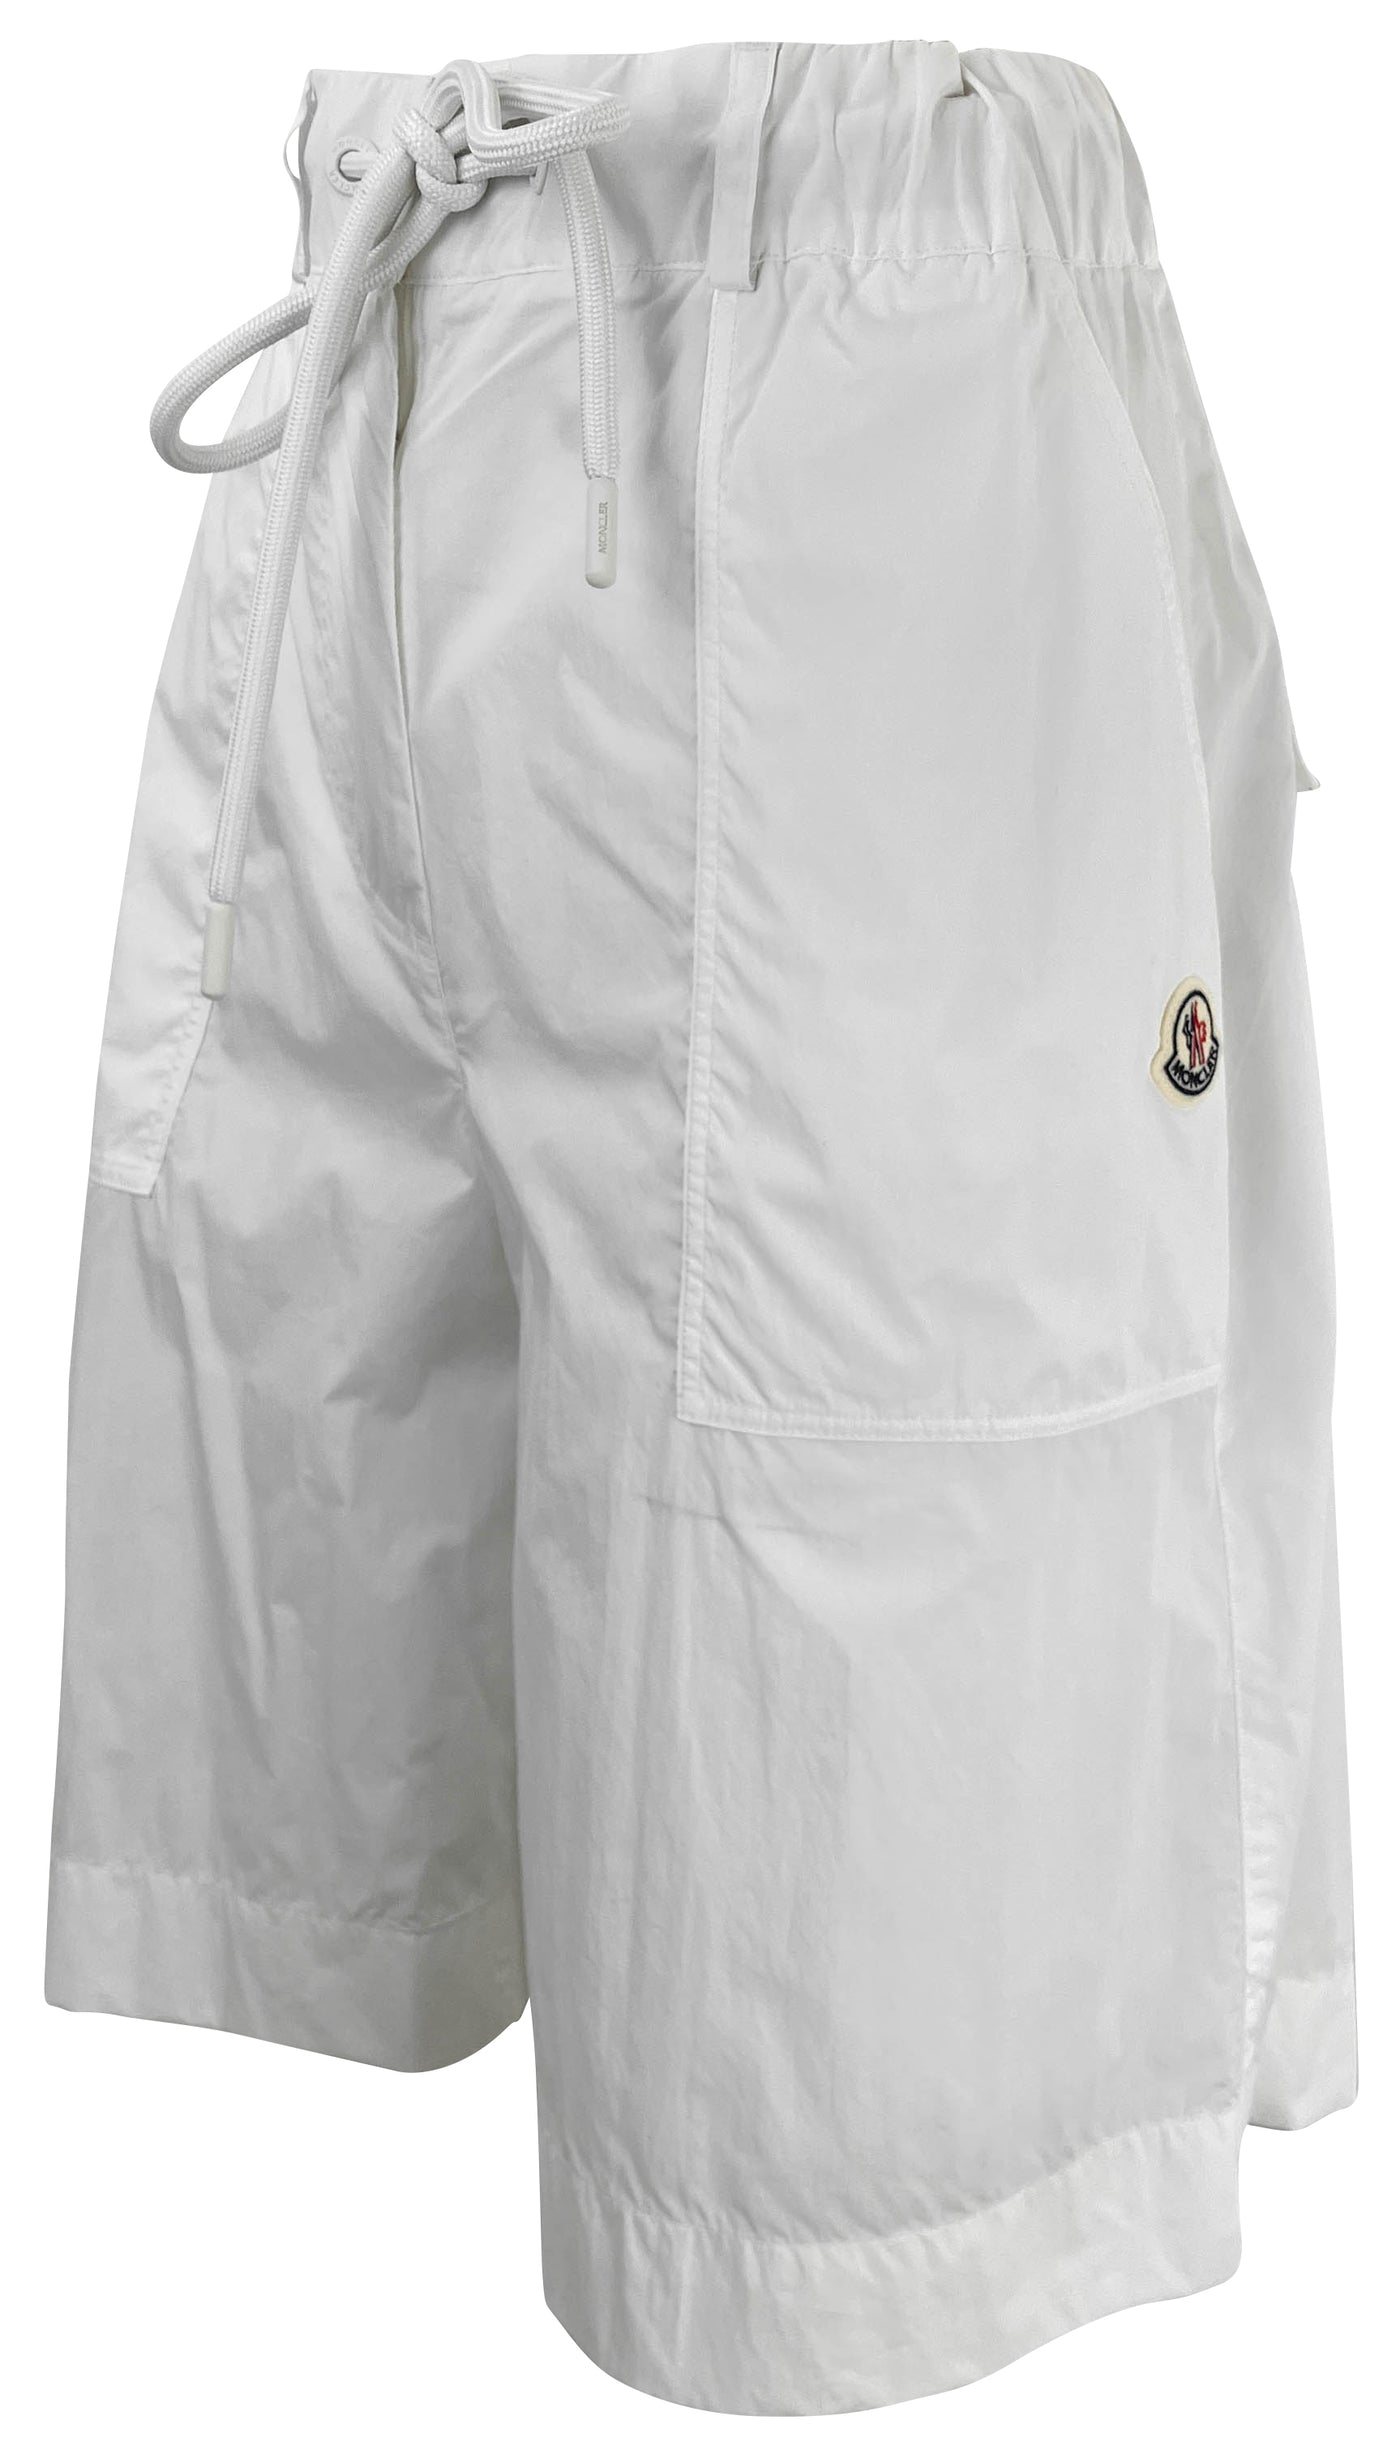 Moncler Long Shorts in White - Discounts on Moncler at UAL